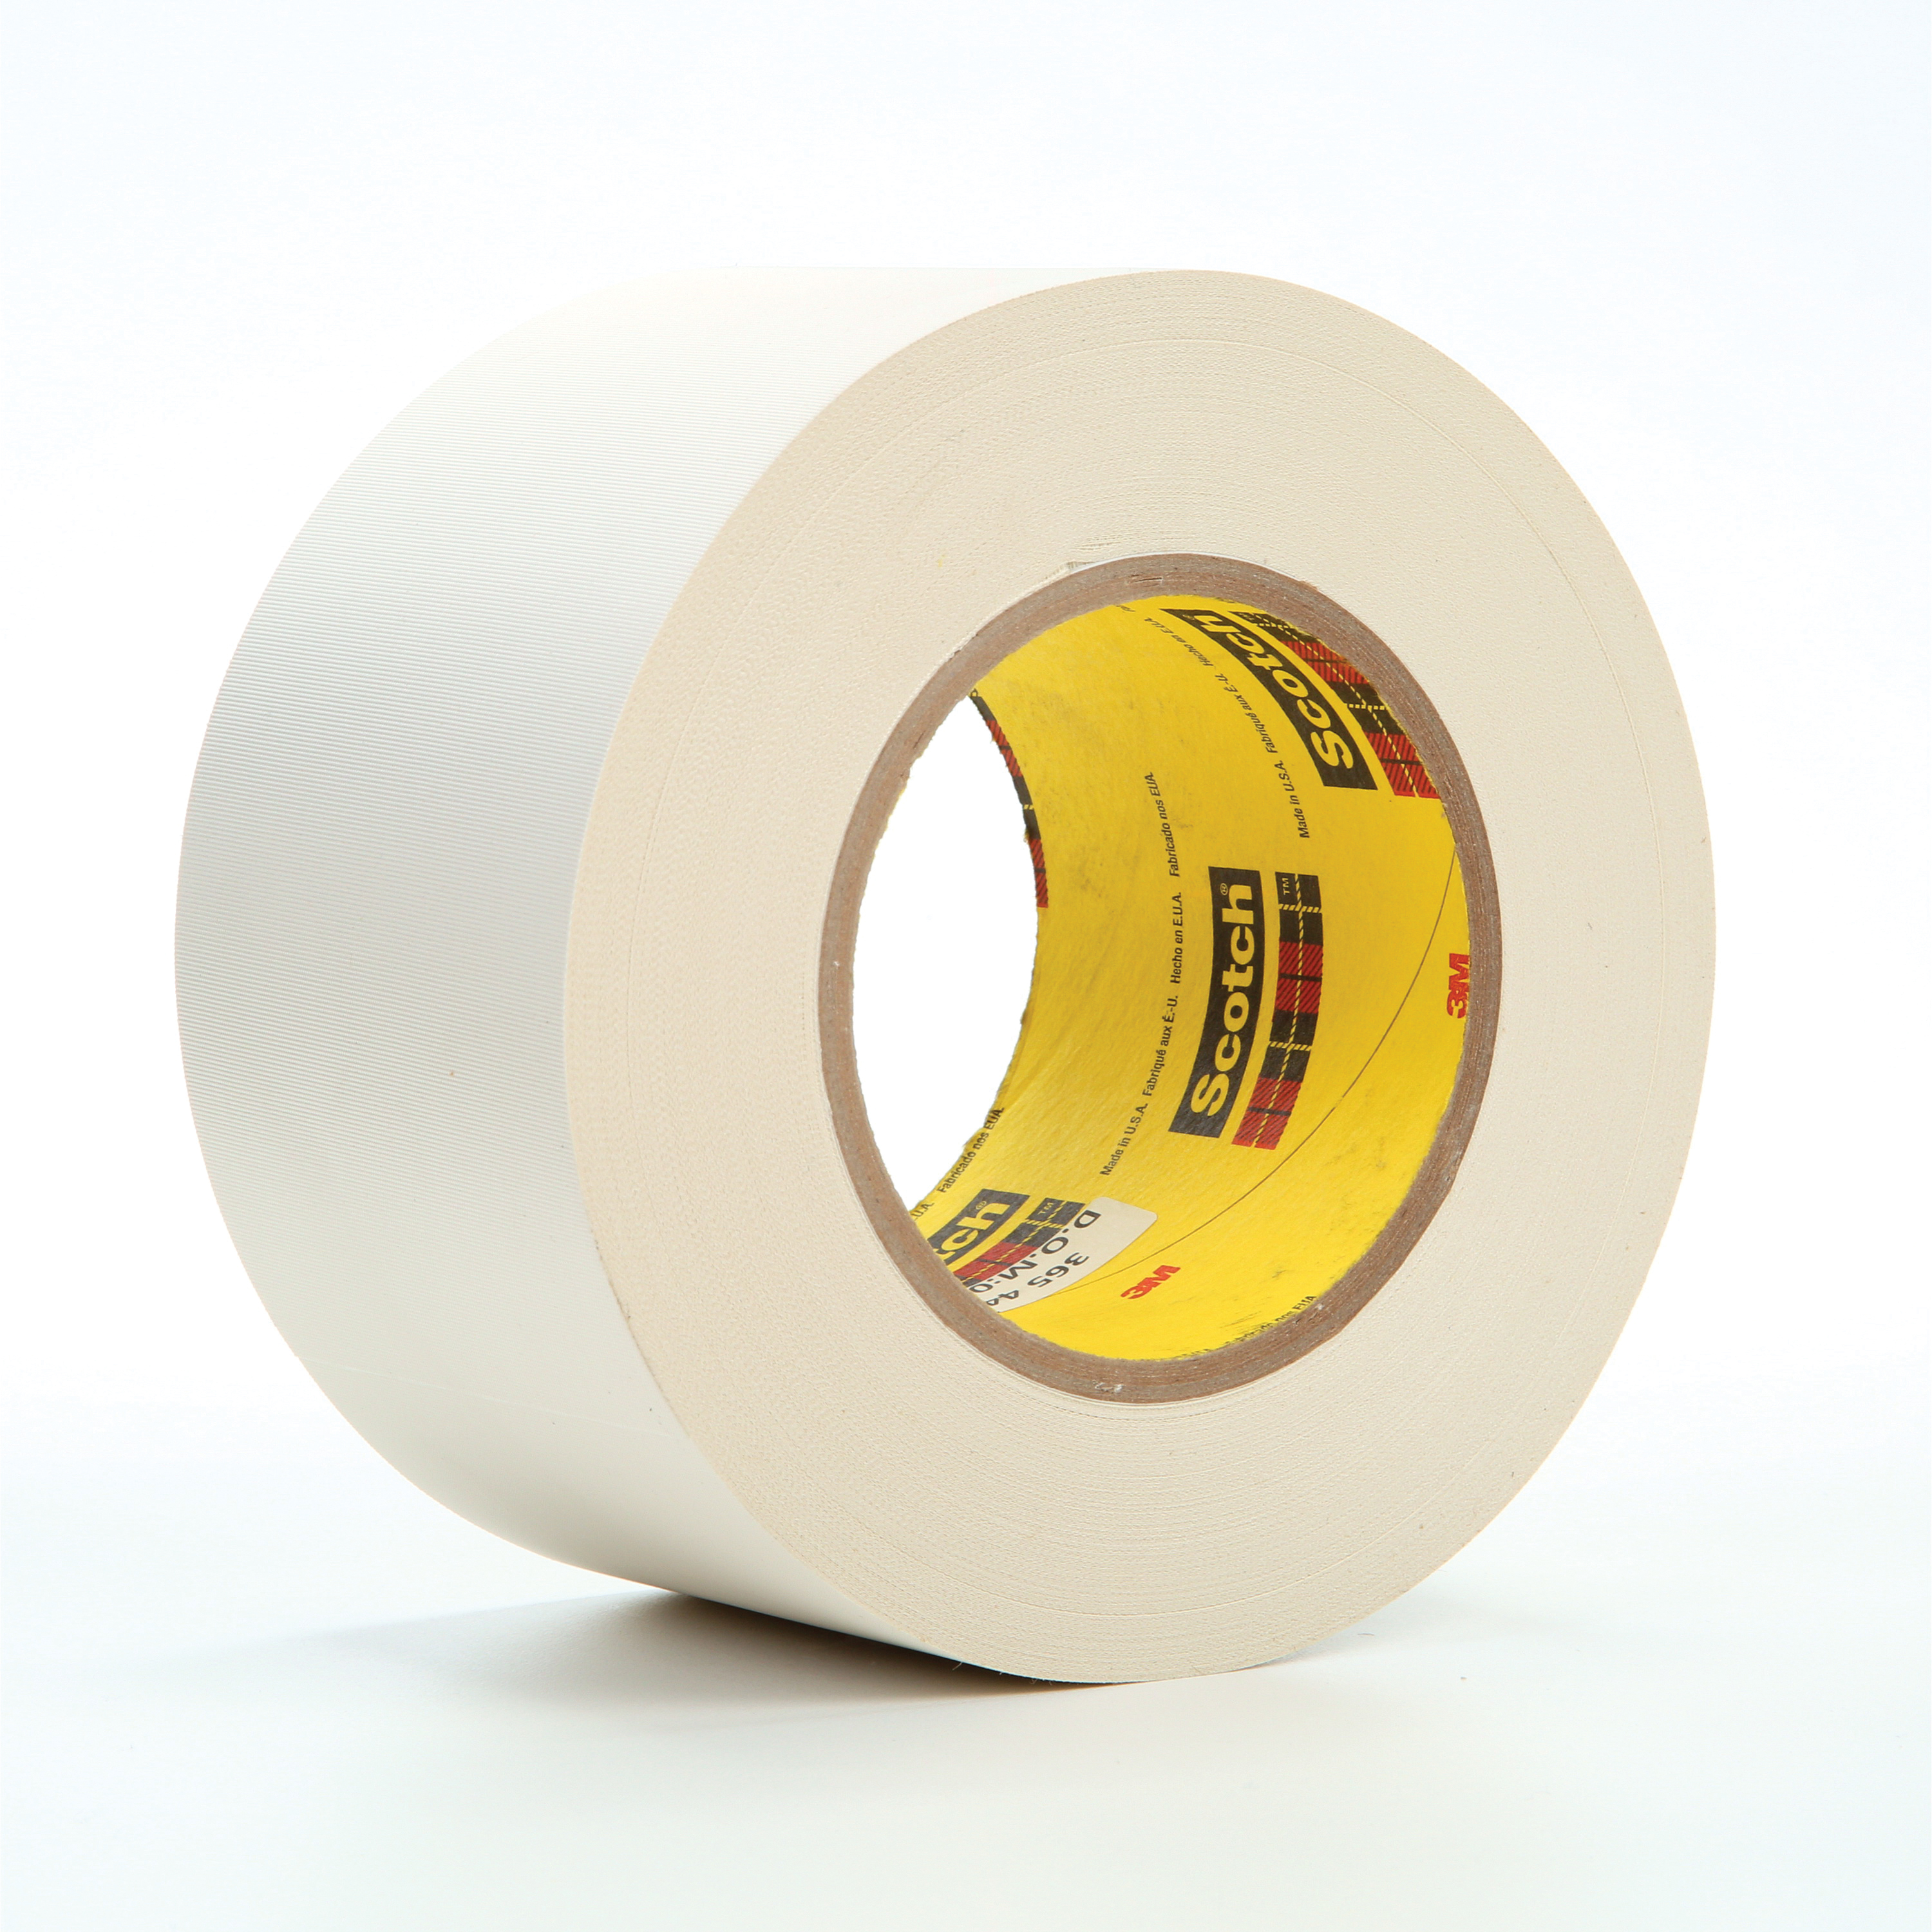 3M™ 021200-03021 Cloth Tape, 60 yd L x 3 in W, 8.3 mil THK, Thermoset Rubber Resin Adhesive, Glass Cloth Backing, White